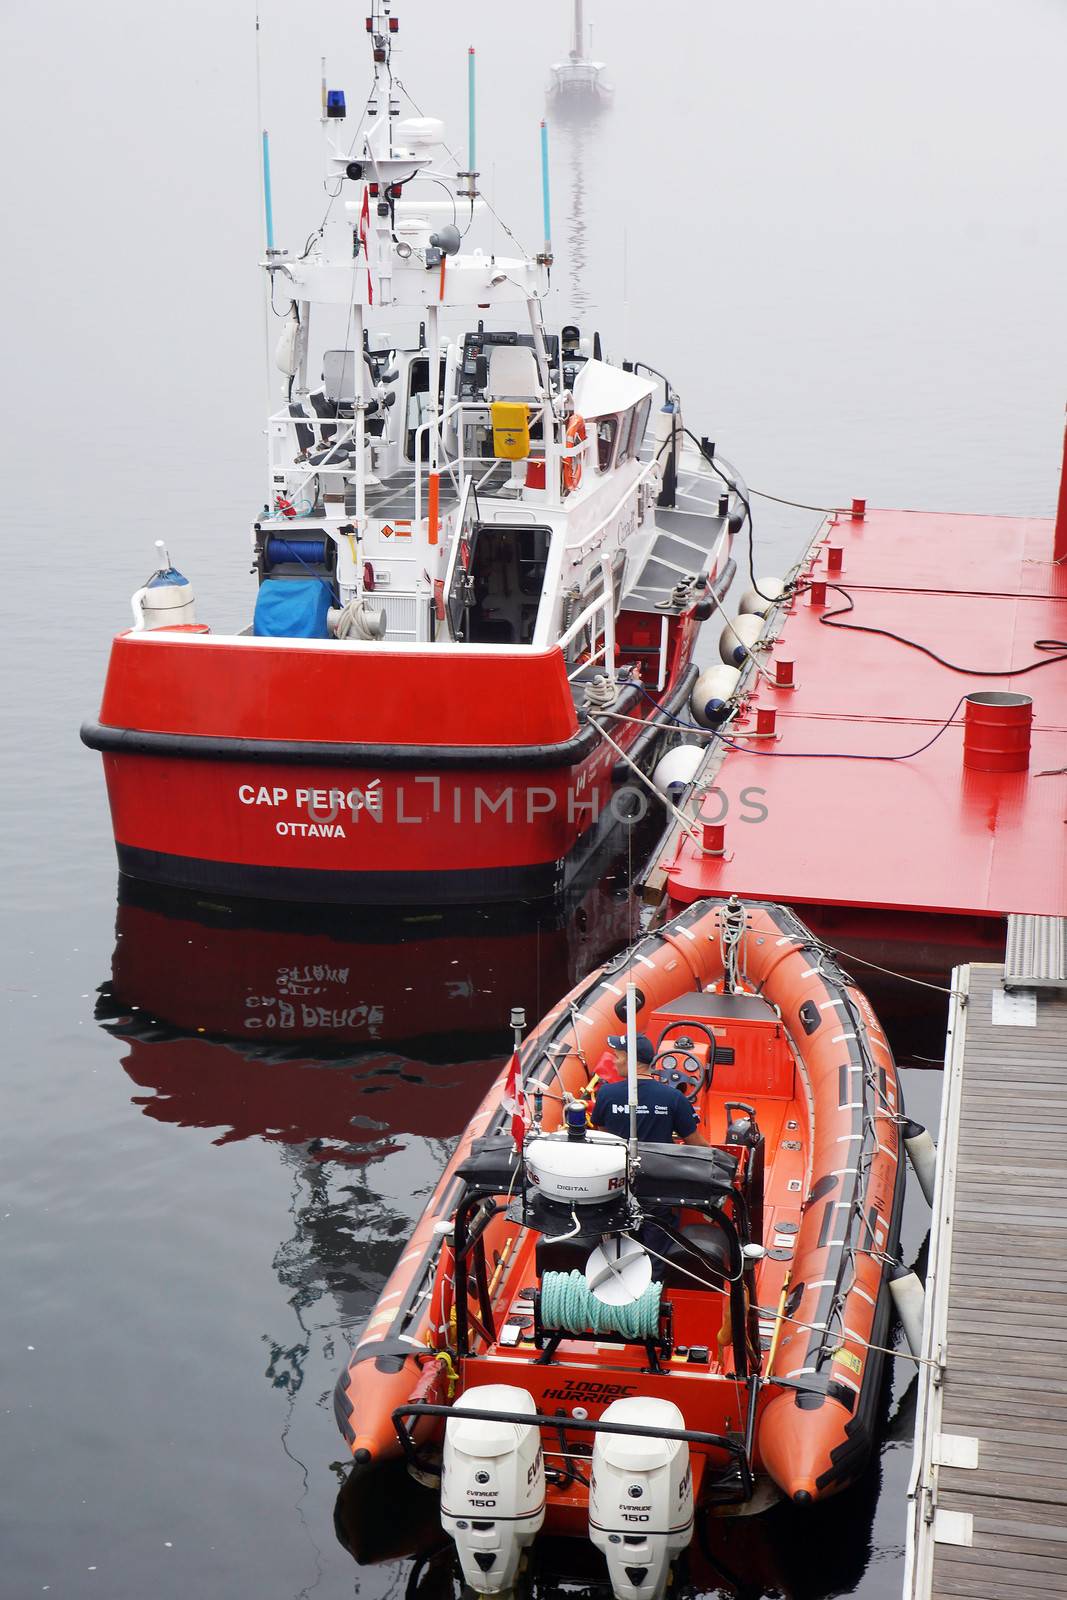 CANADA, QUEBEC, TADOUSSAC- AUGUST 8: Canadian coast guard vessel and zodiac docked at Tadoussac, Quebec, Canada on August 8, 2013. The Canadian coast guard is responsible for 2.3 million square nautical miles (8 million km2).